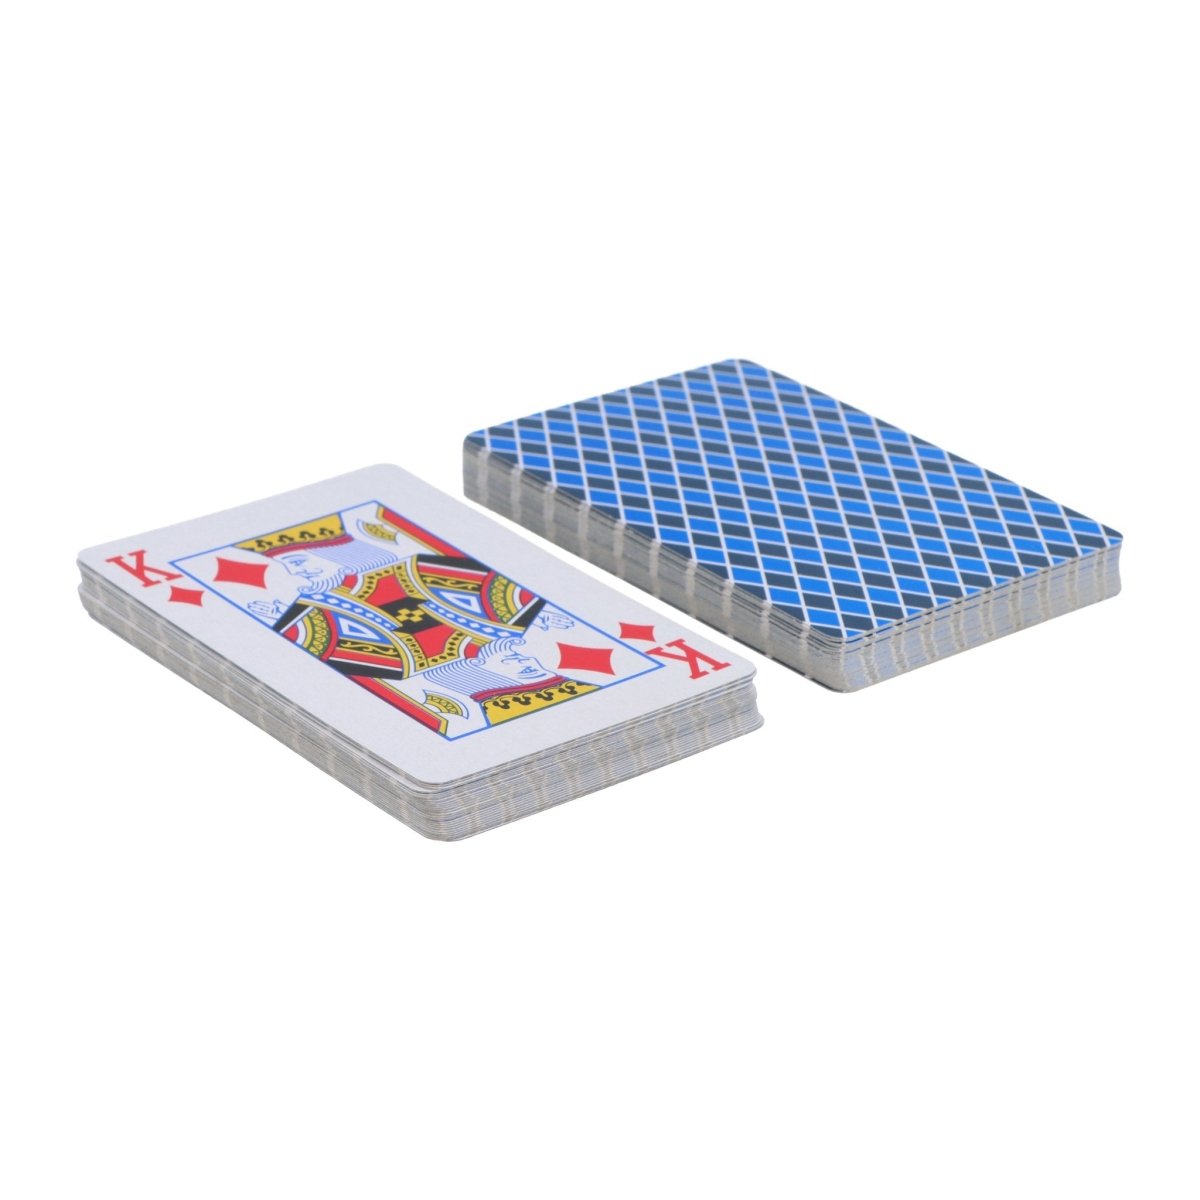 Plastic Coated Durable Playing Cards - Kids Party Craft